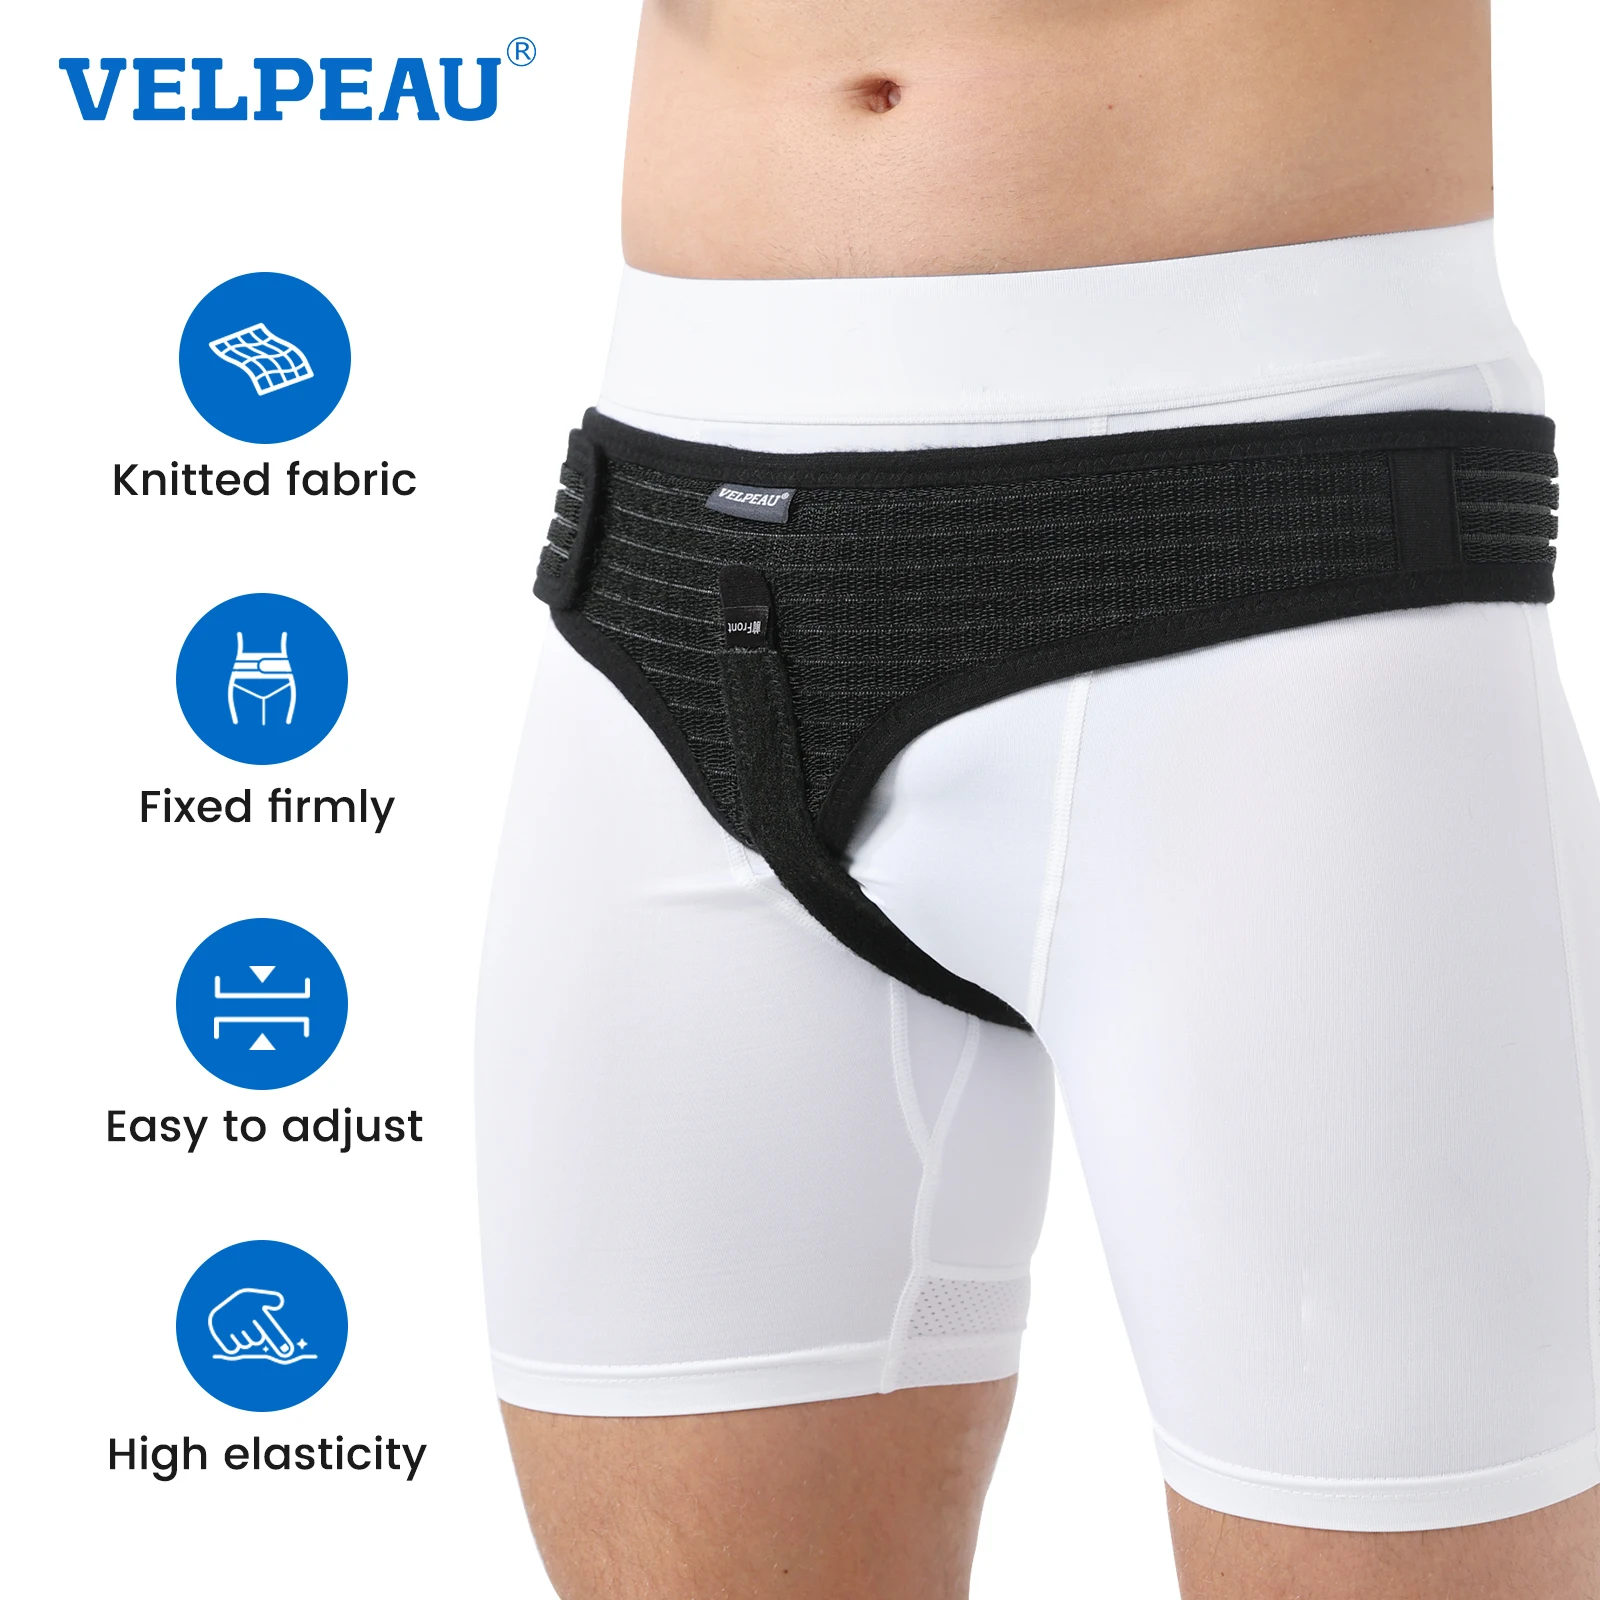 VELPEAU Hernia Belt Truss for Single Inguinal and Pain Relief